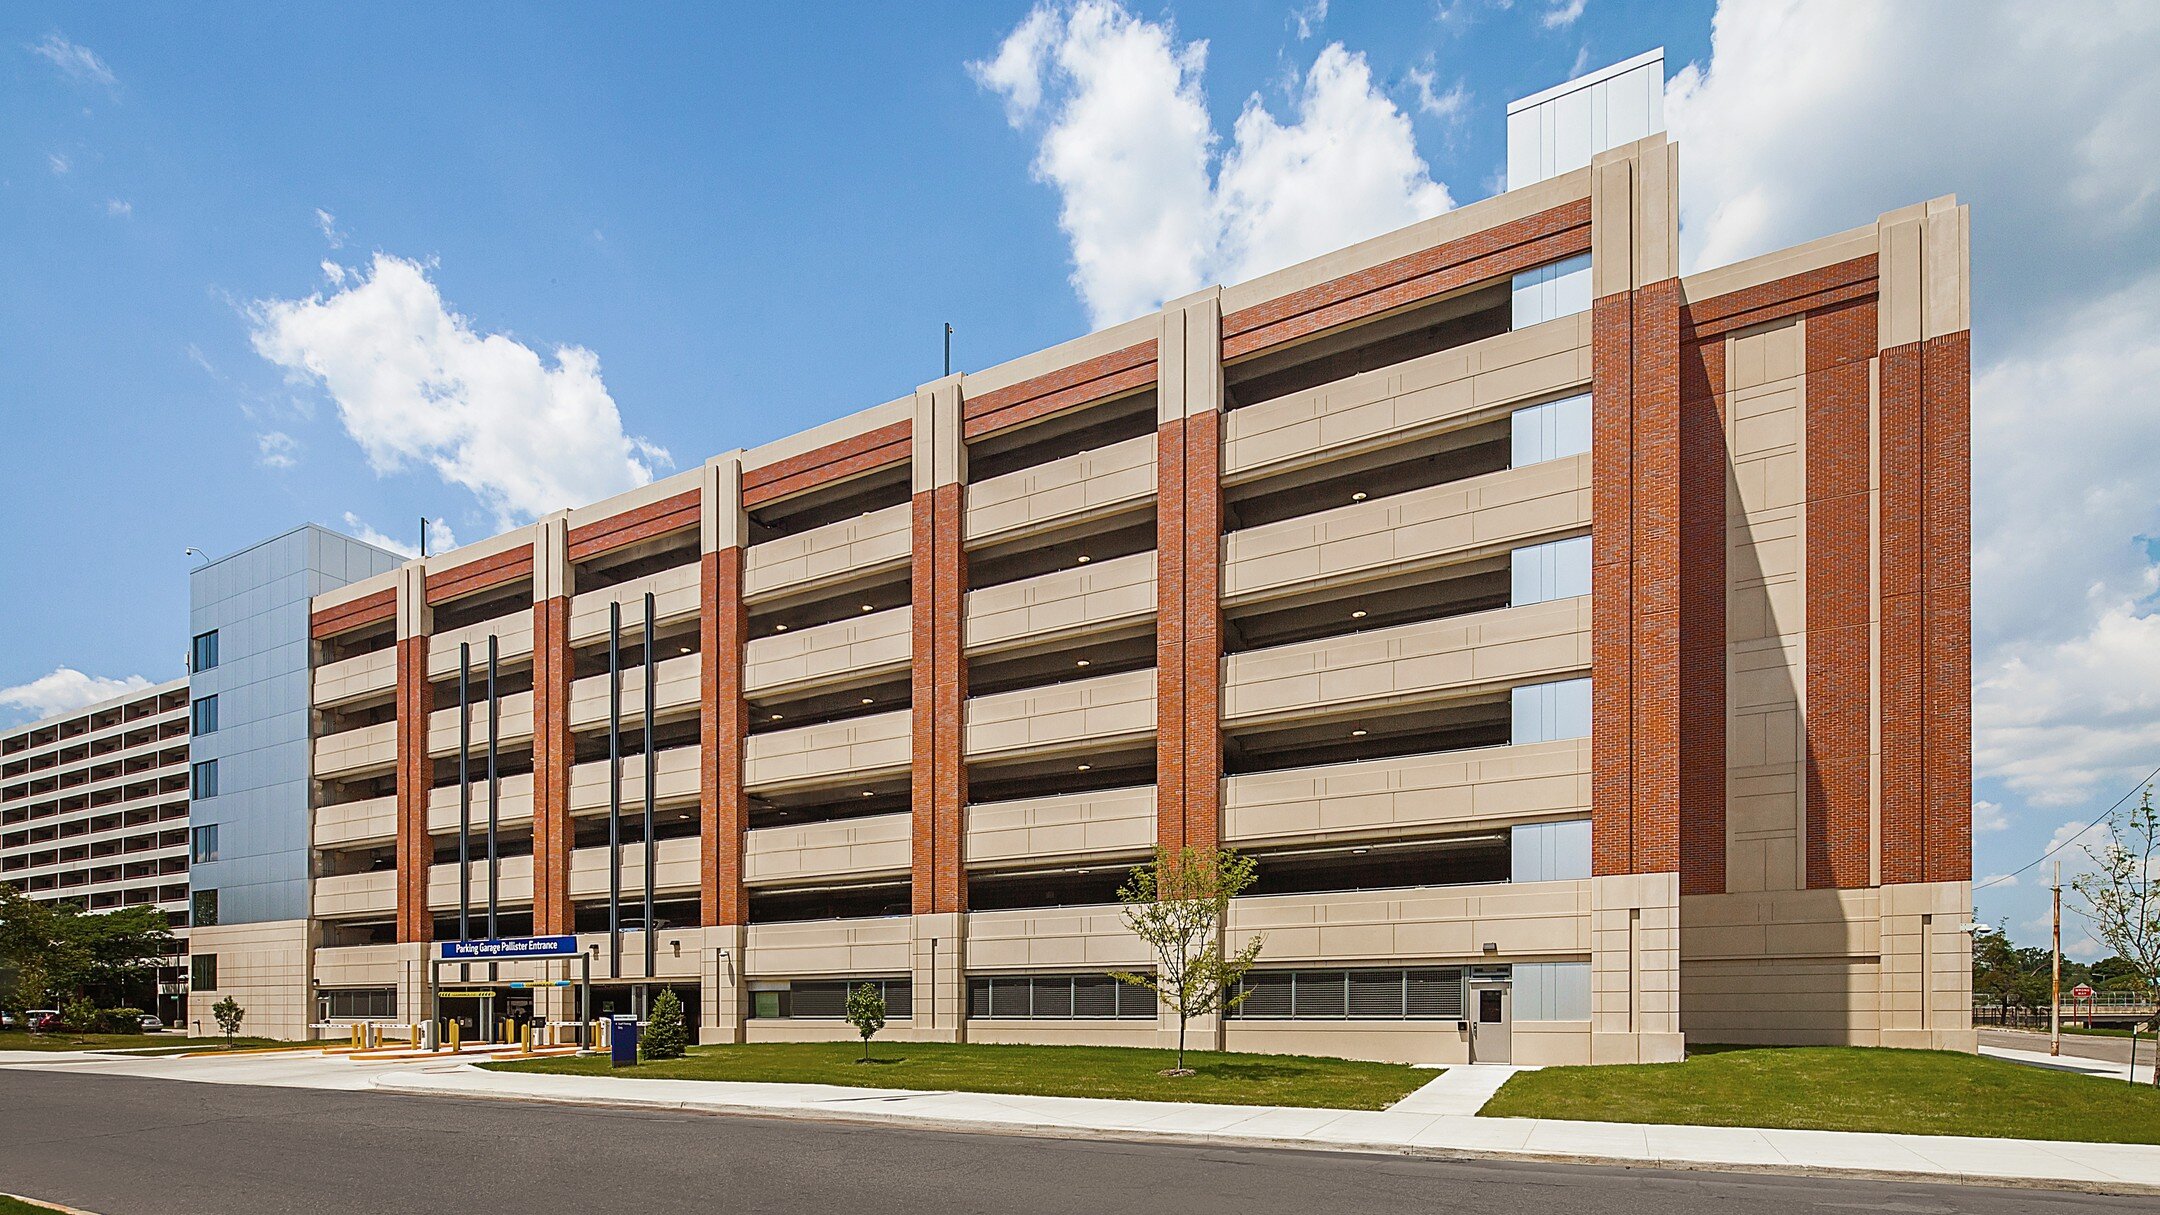 Henry Ford Hospital Parking Expansion | Detroit, MI
 
We're delighted to announce the completion of a significant addition to Henry Ford Hospital's campus: a new parking facility designed to accommodate the growing needs of the community. It offers 1